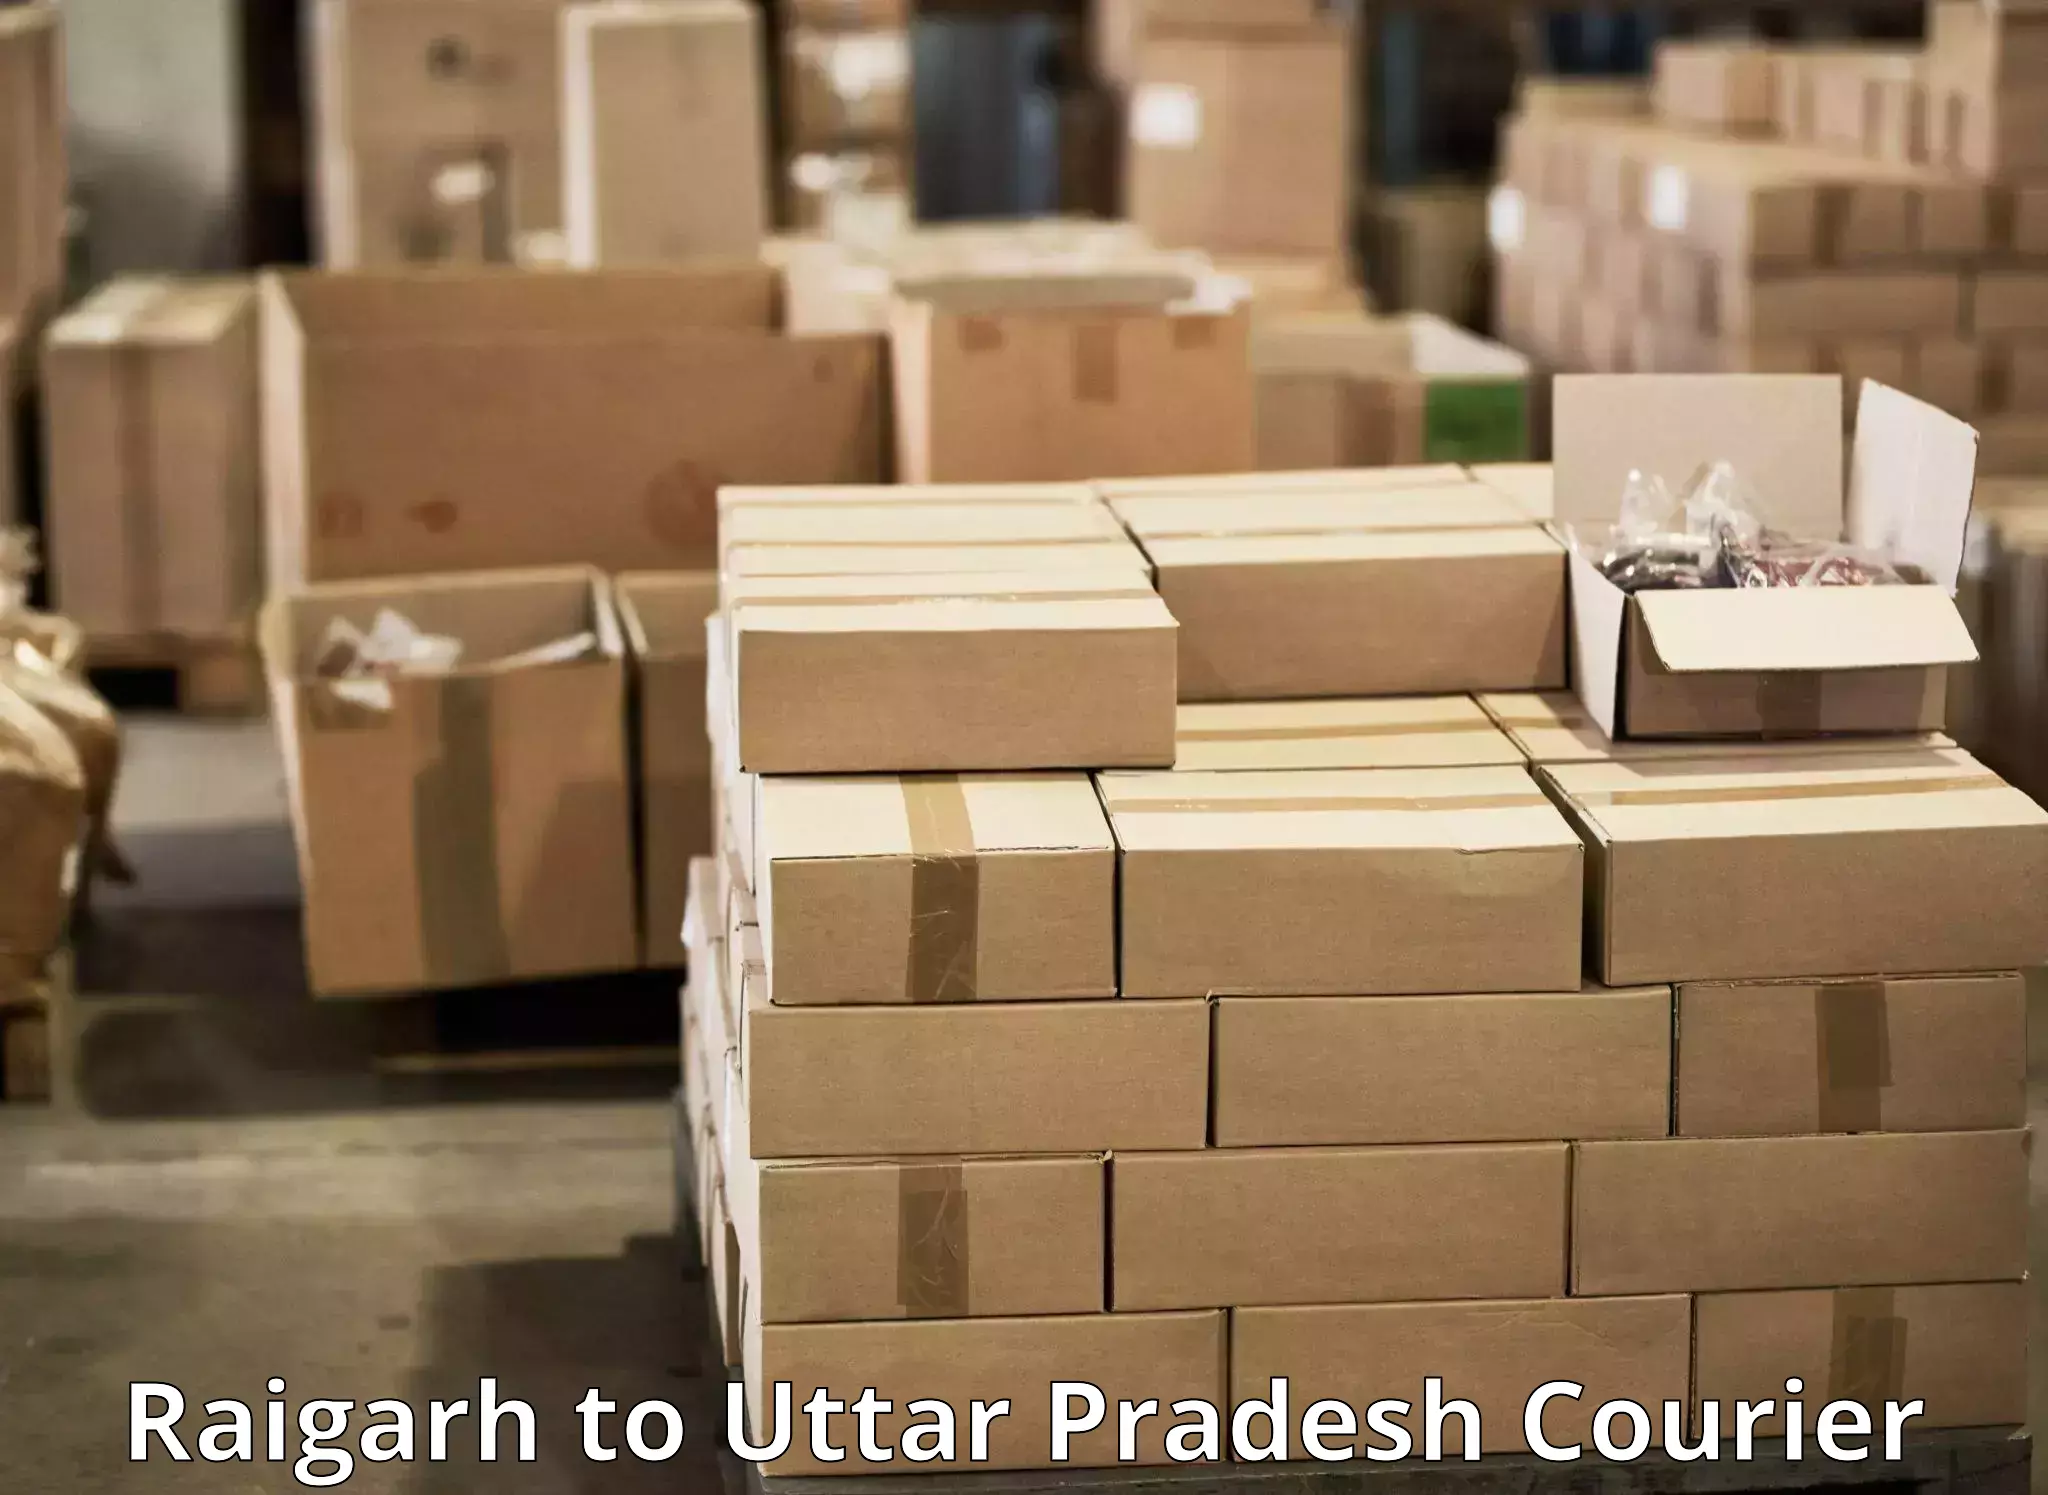 Courier service partnerships Raigarh to Sikandrabad